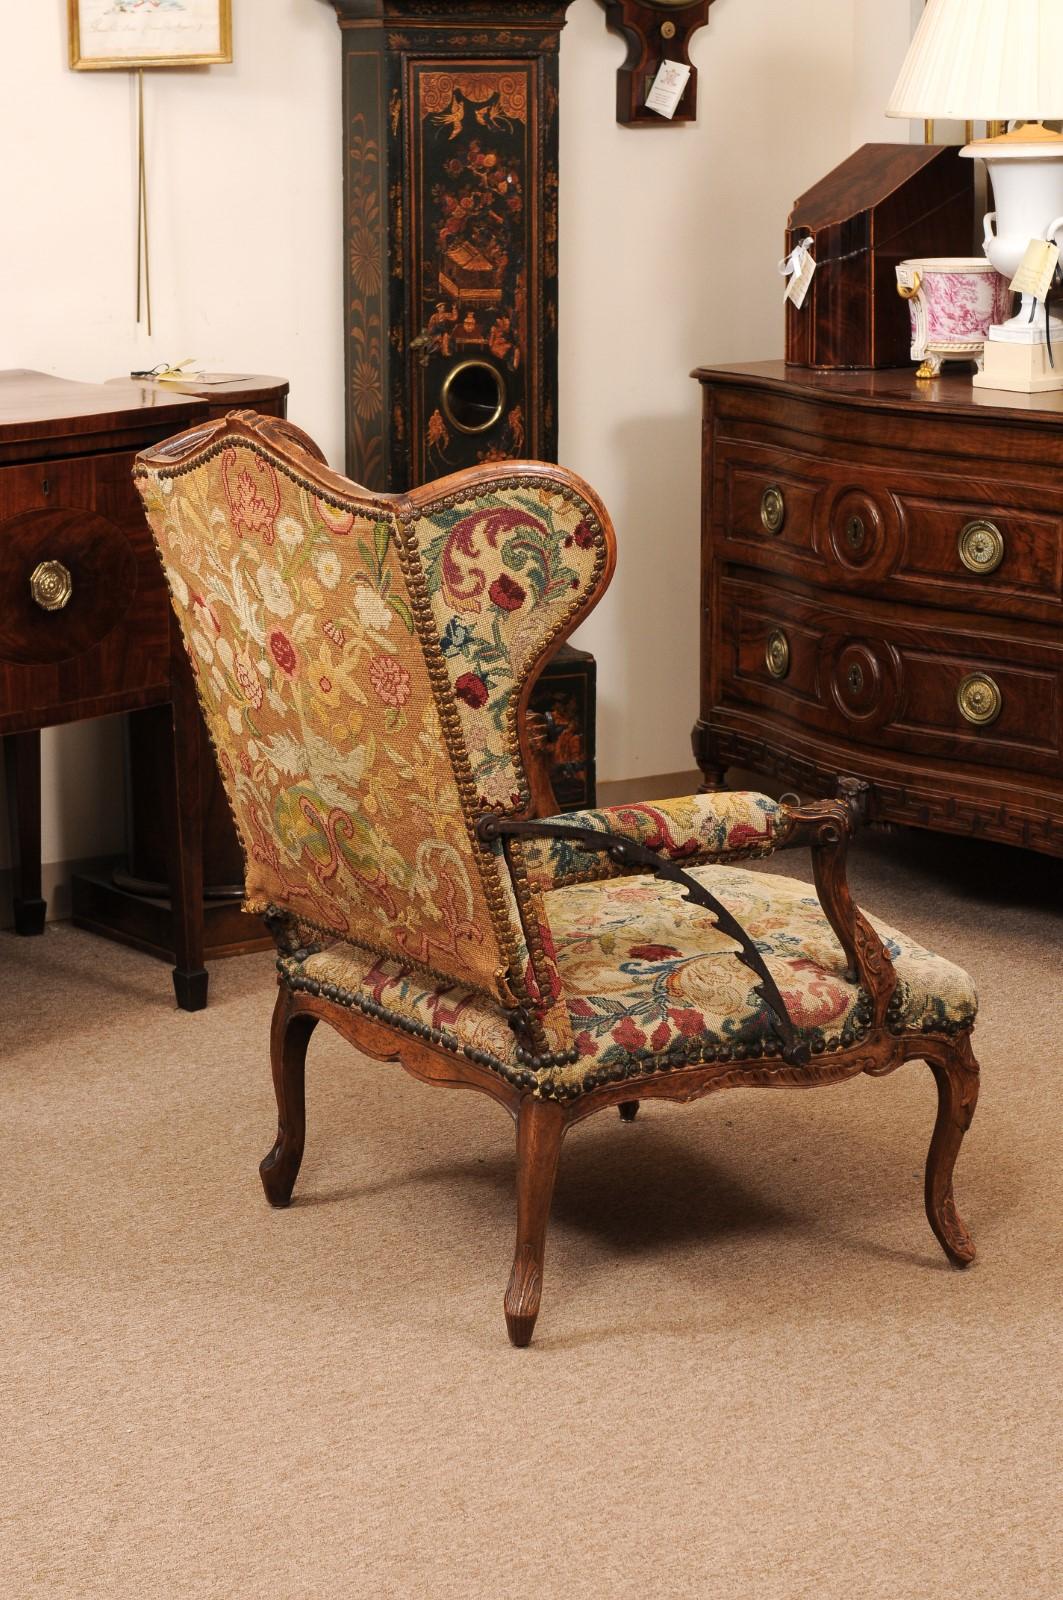 Early 18th Century French Regence Period Walnut Ratchet Wing Chair with Needlewo For Sale 4